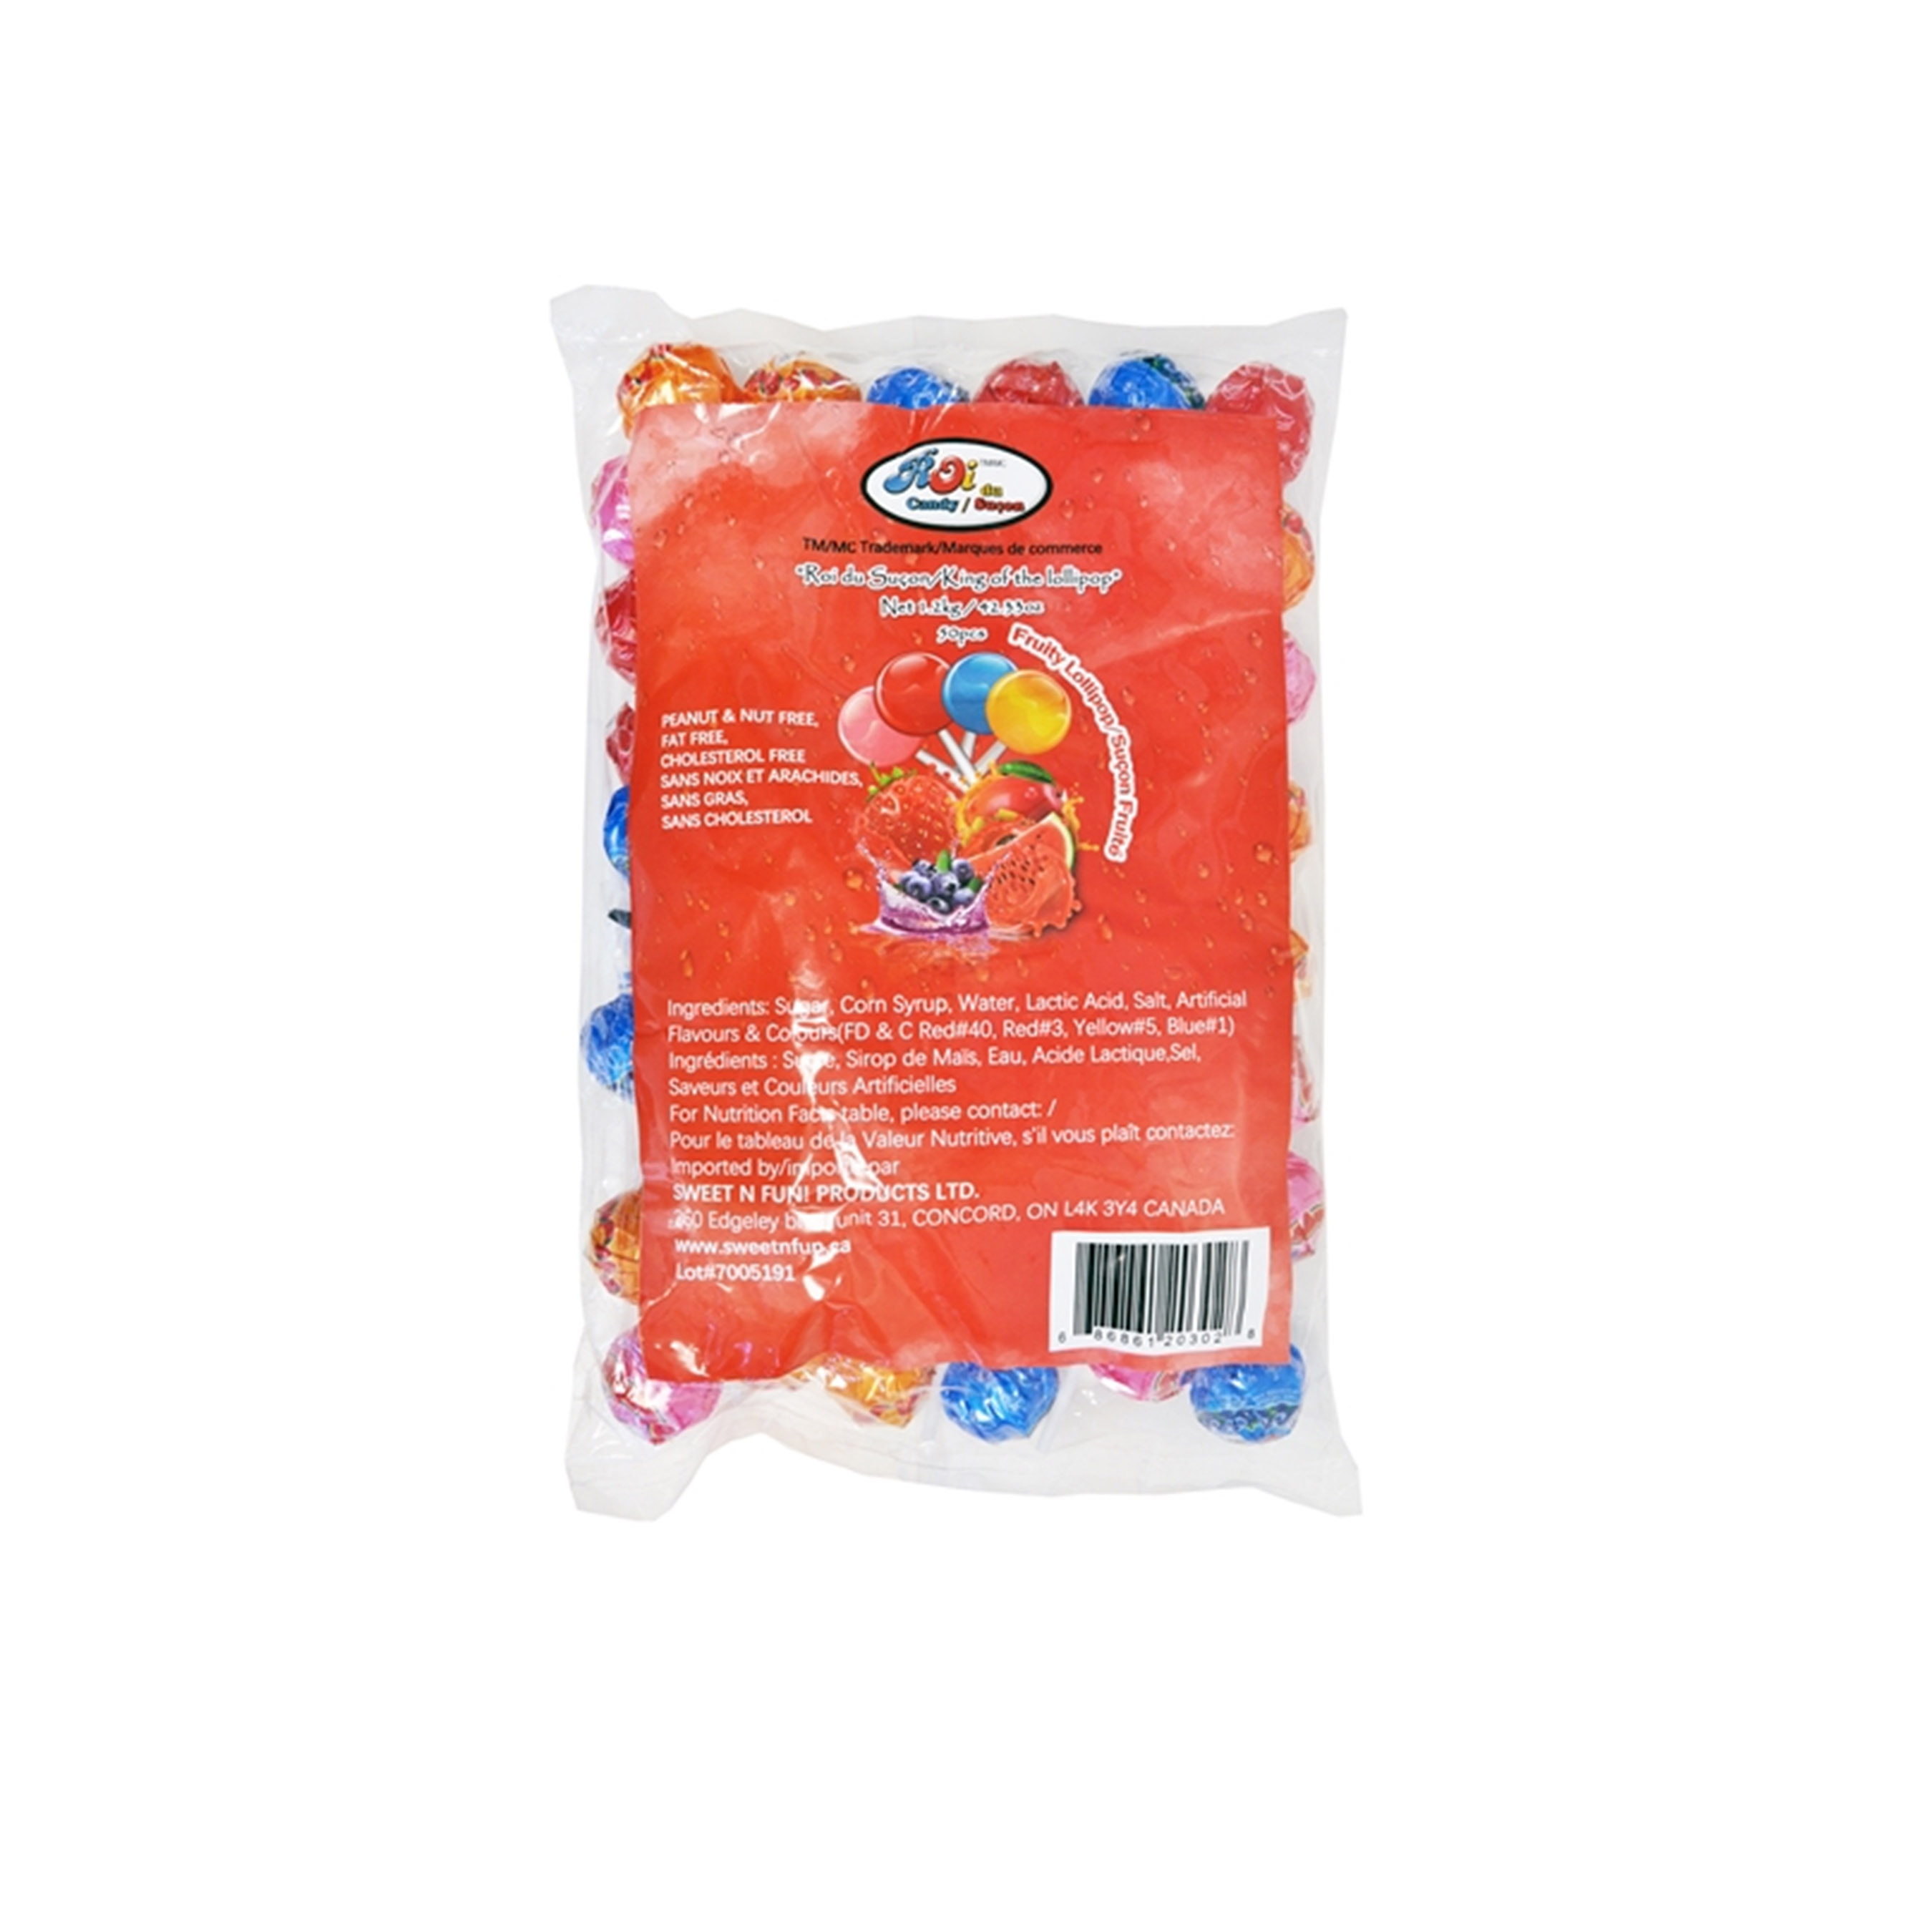 mini lollipop candies with four flavors of Blueberry, Strawberry, watermelon, and mango in a bag. 100 pieces per bag